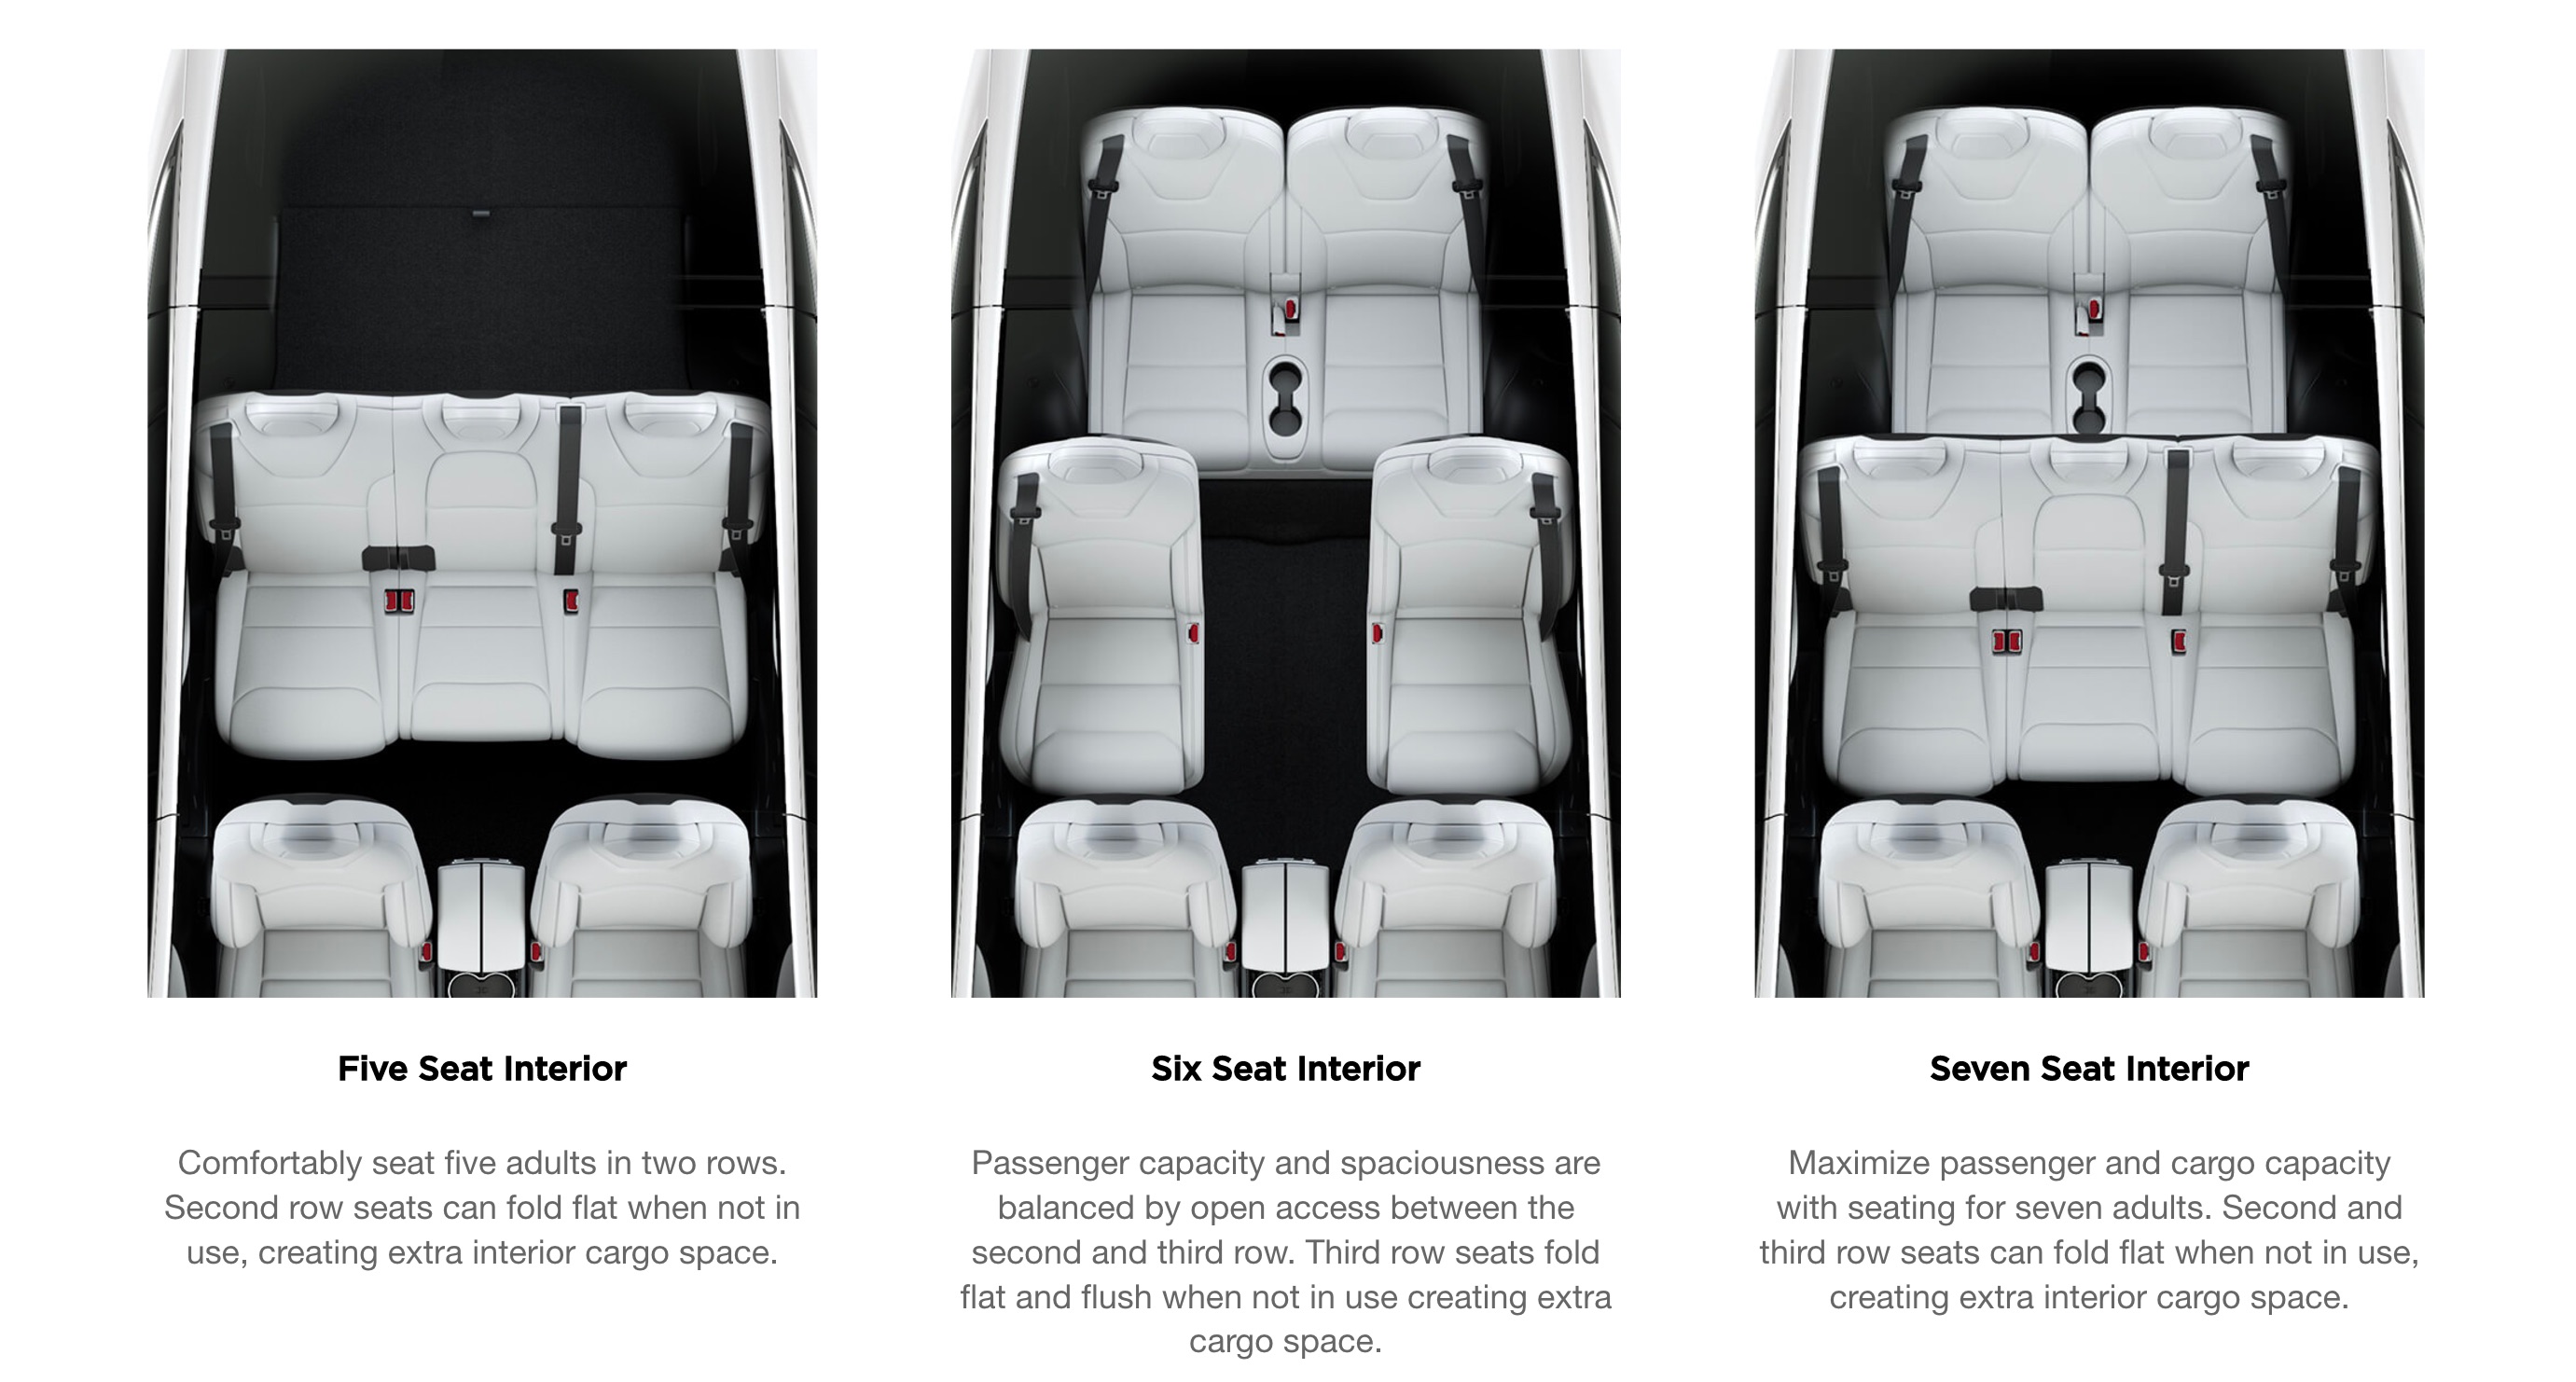 Tesla Model X in 7seat configuration finally gets foldflat 2nd row